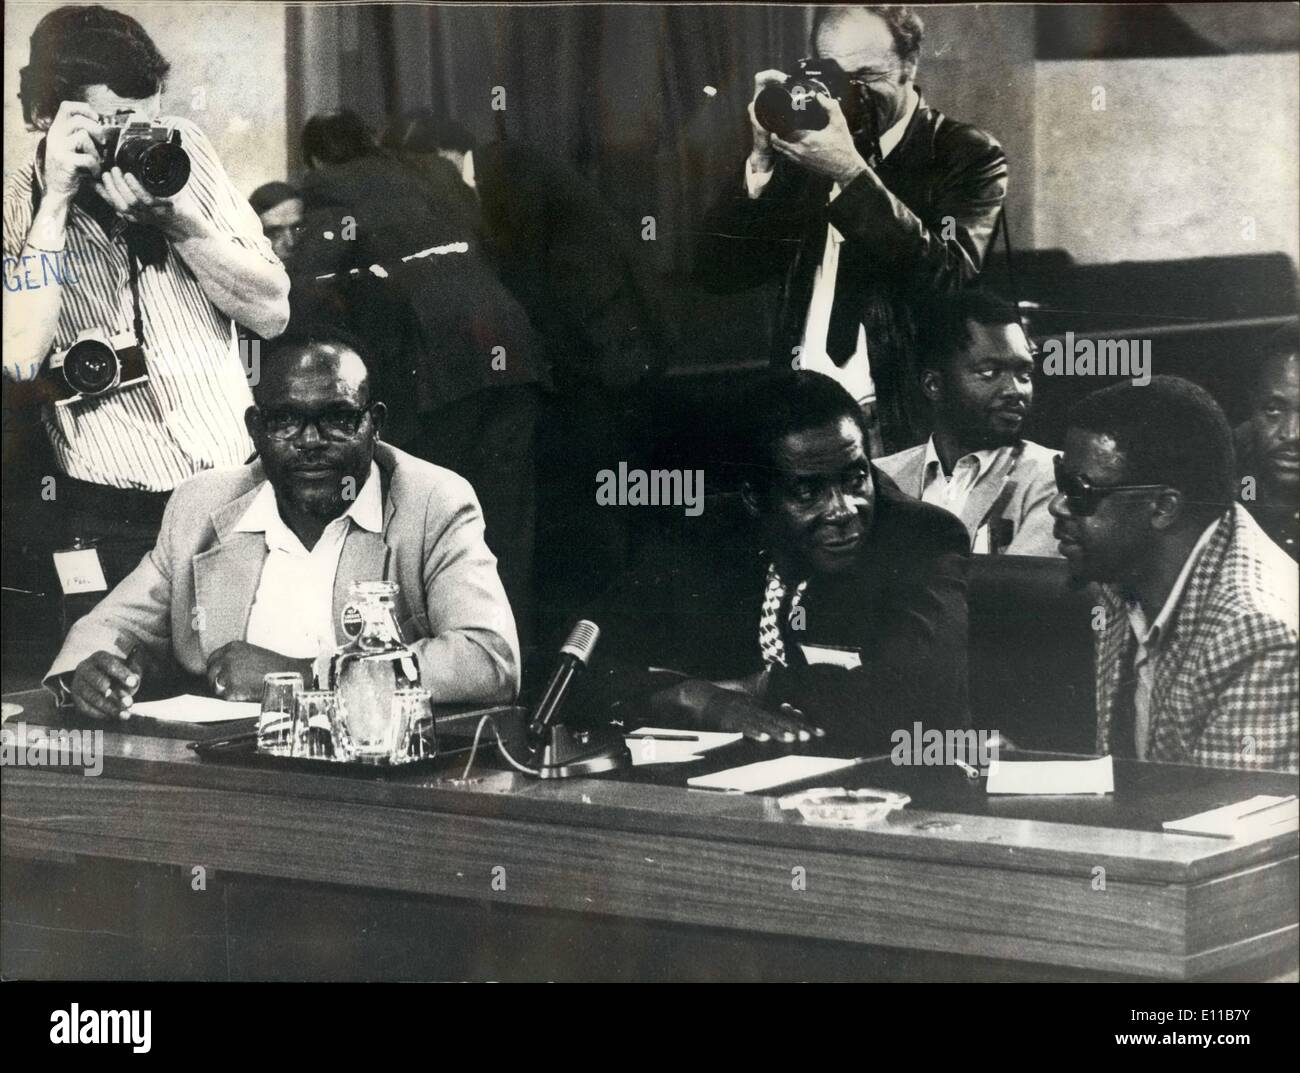 Nov. 11, 1976 - The Rhodesia Conference in Geneva: Photo shows the delegation of the Zimbabwe Popular Army (Zipa) and the Zimbabwe African Popular Union (ZAPU) headed by Robert Mugabe (centre) pictured at the conference in Geneva. Stock Photo